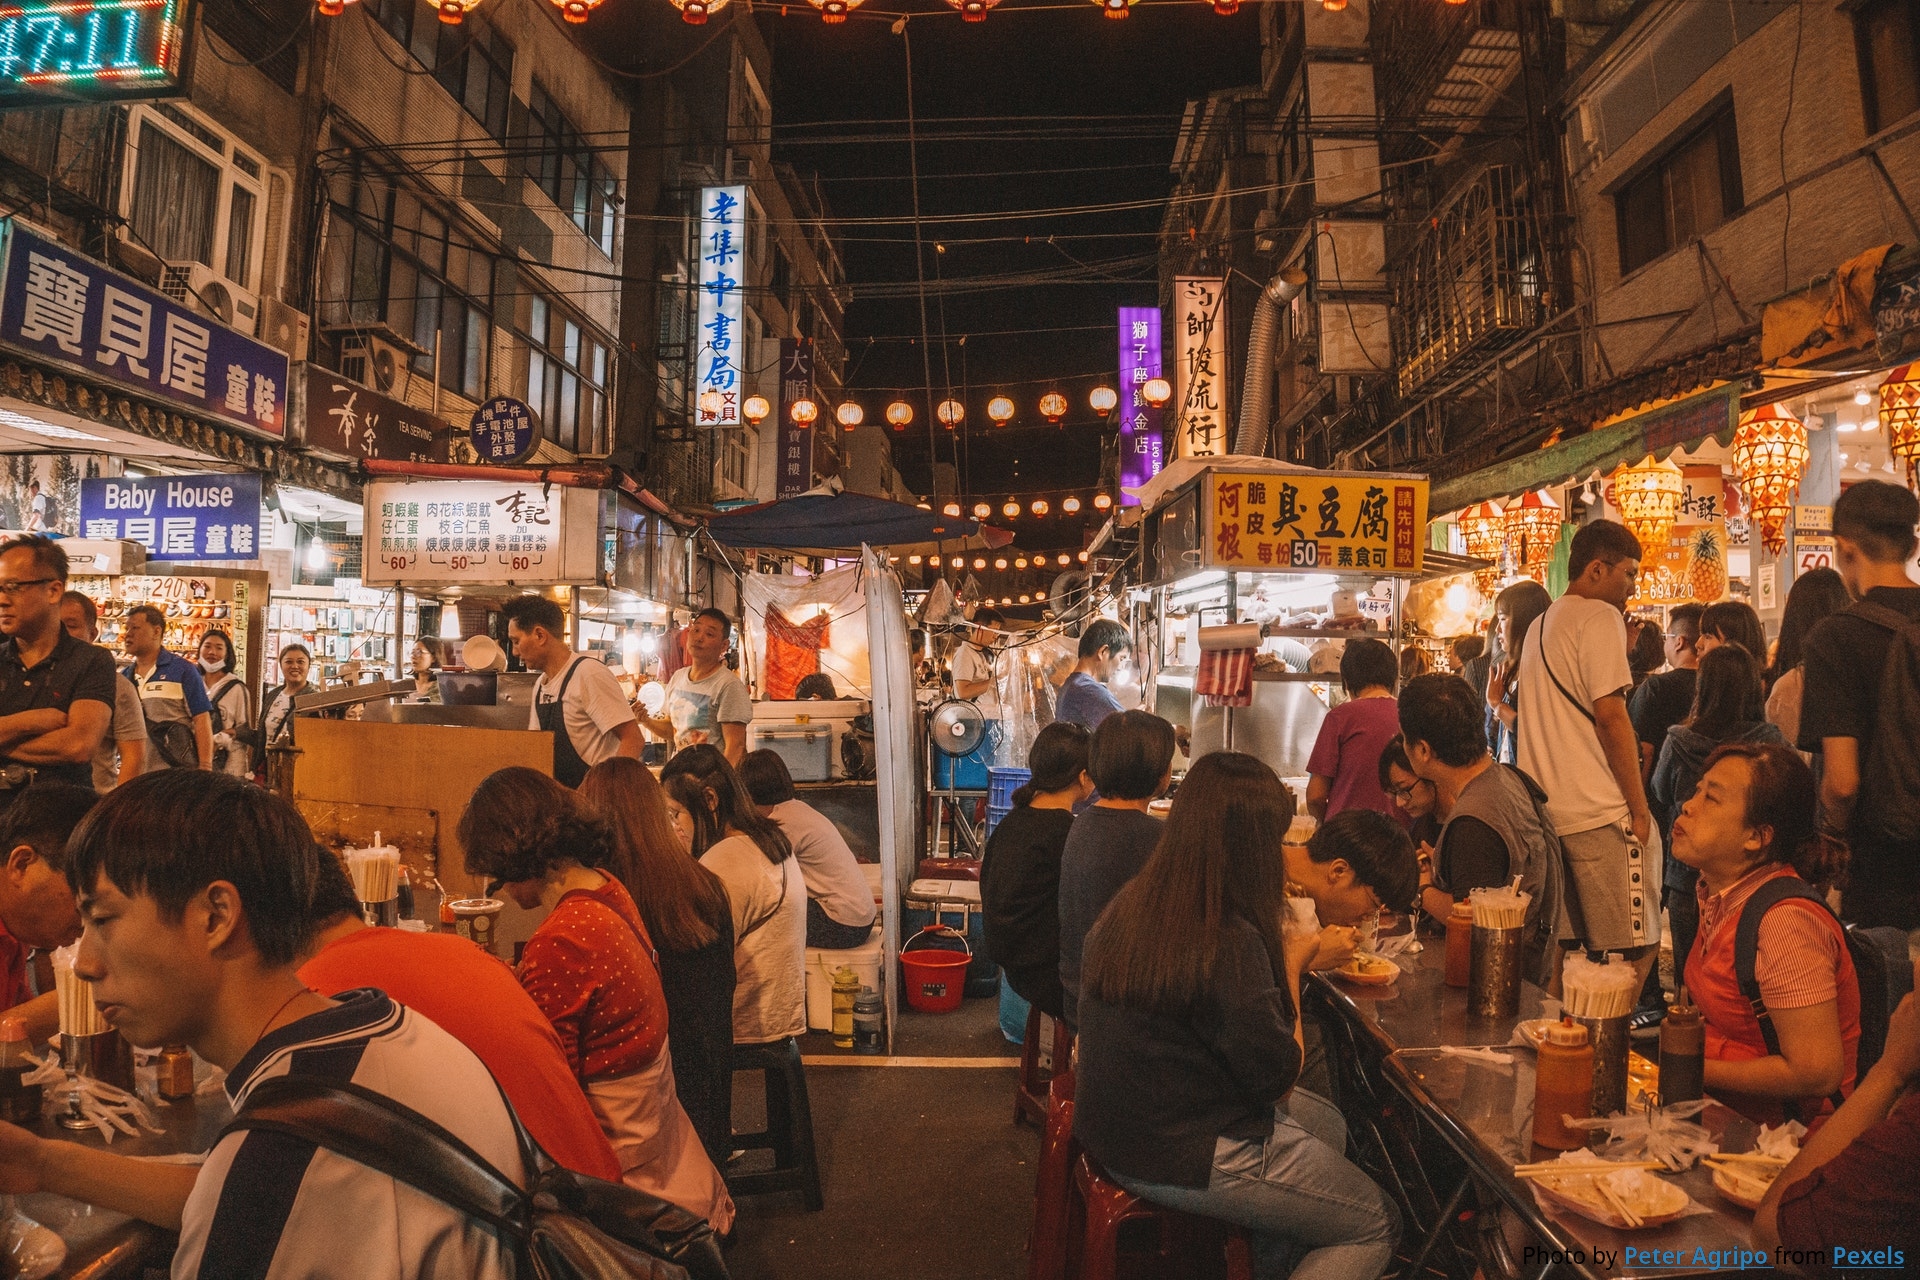 People eating street food. Photography by Peter Agripo from Pexels.